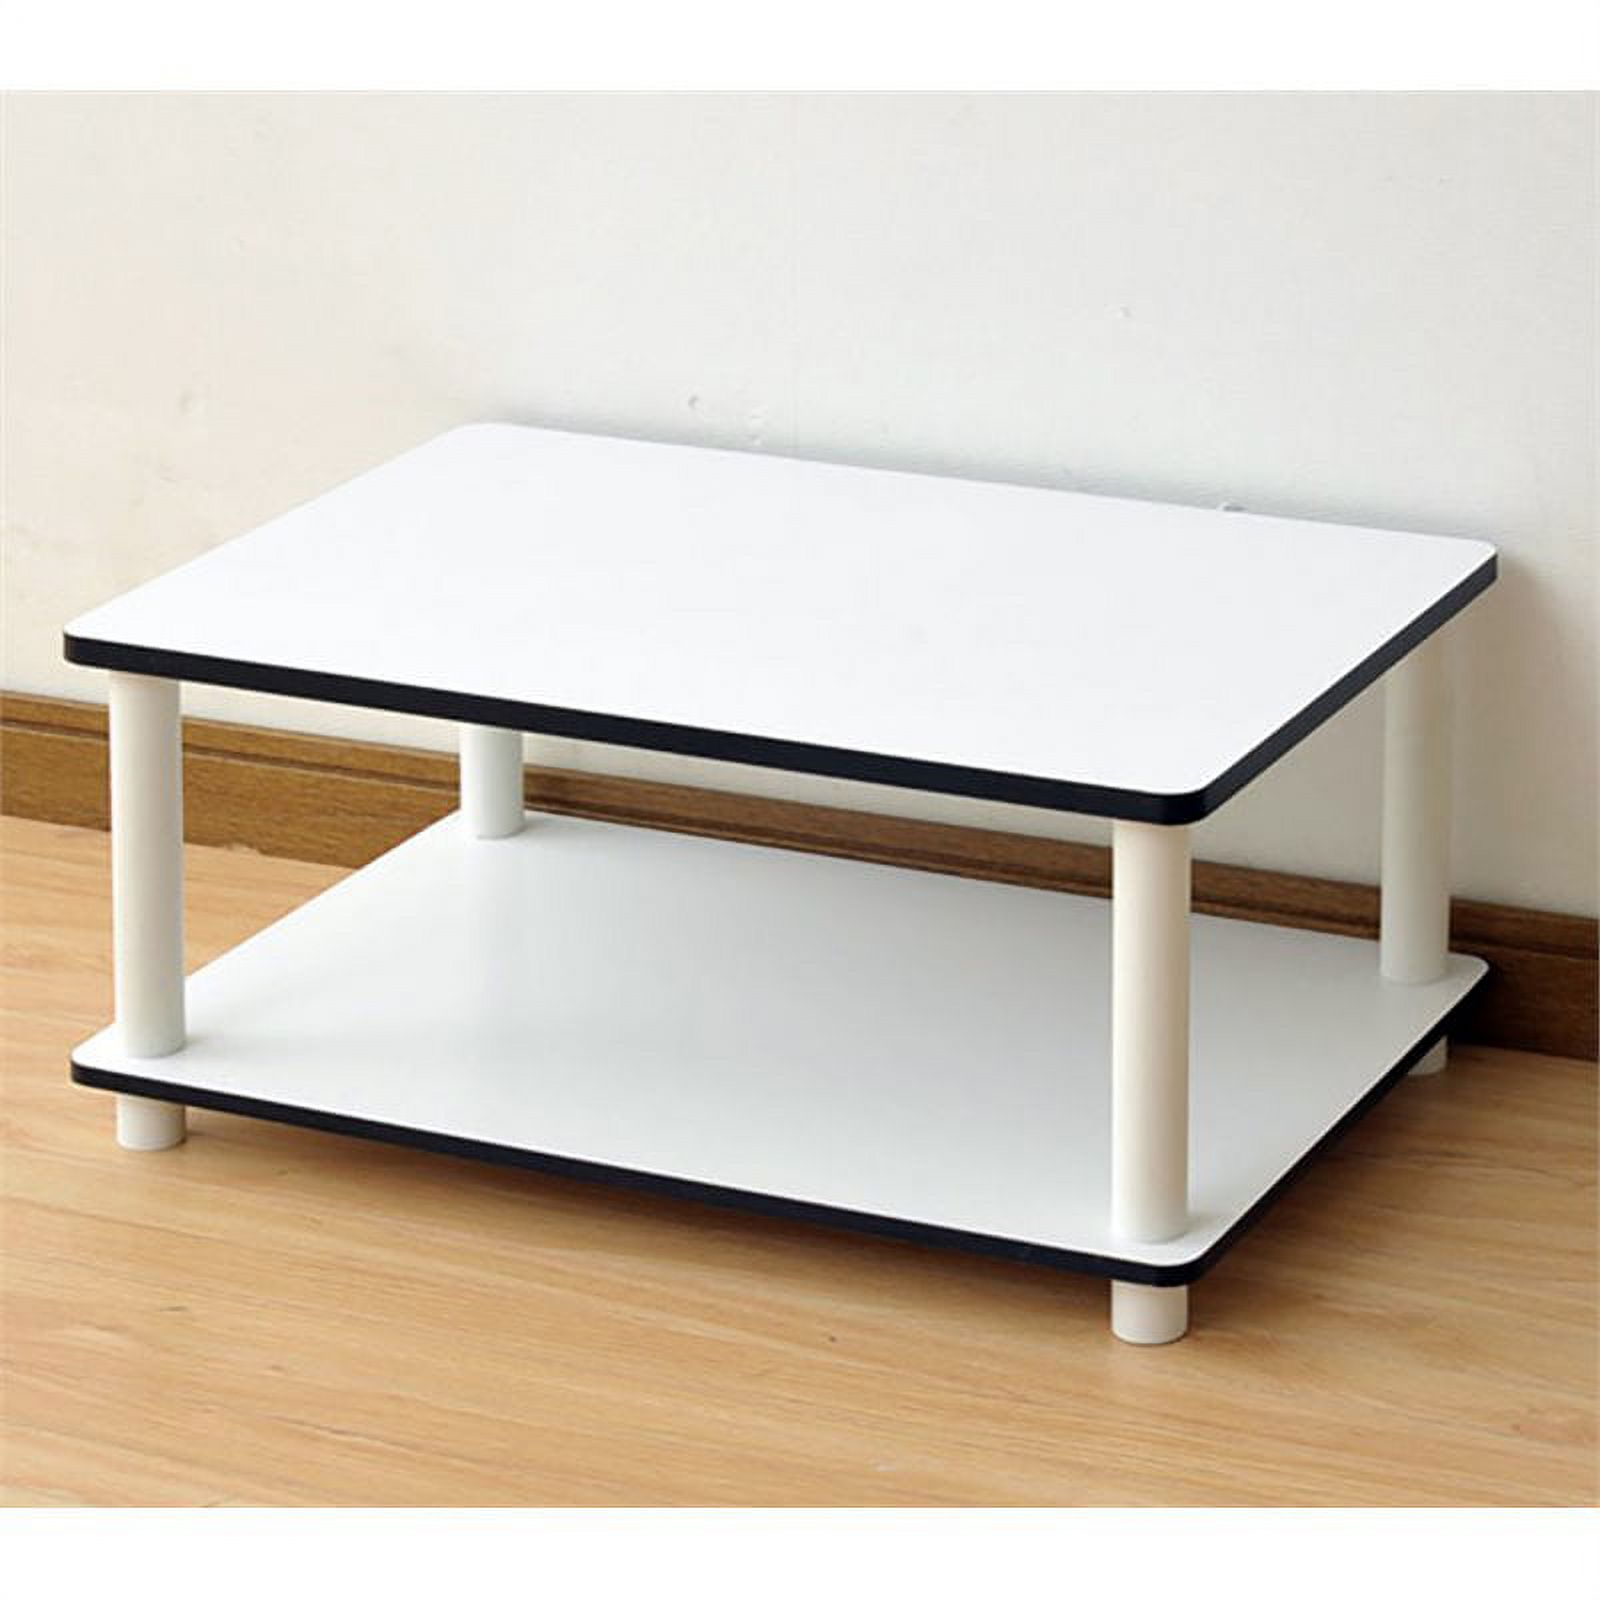 Furinno 11172 Just 2-Tier No-Tools Coffee Table, White - image 3 of 5